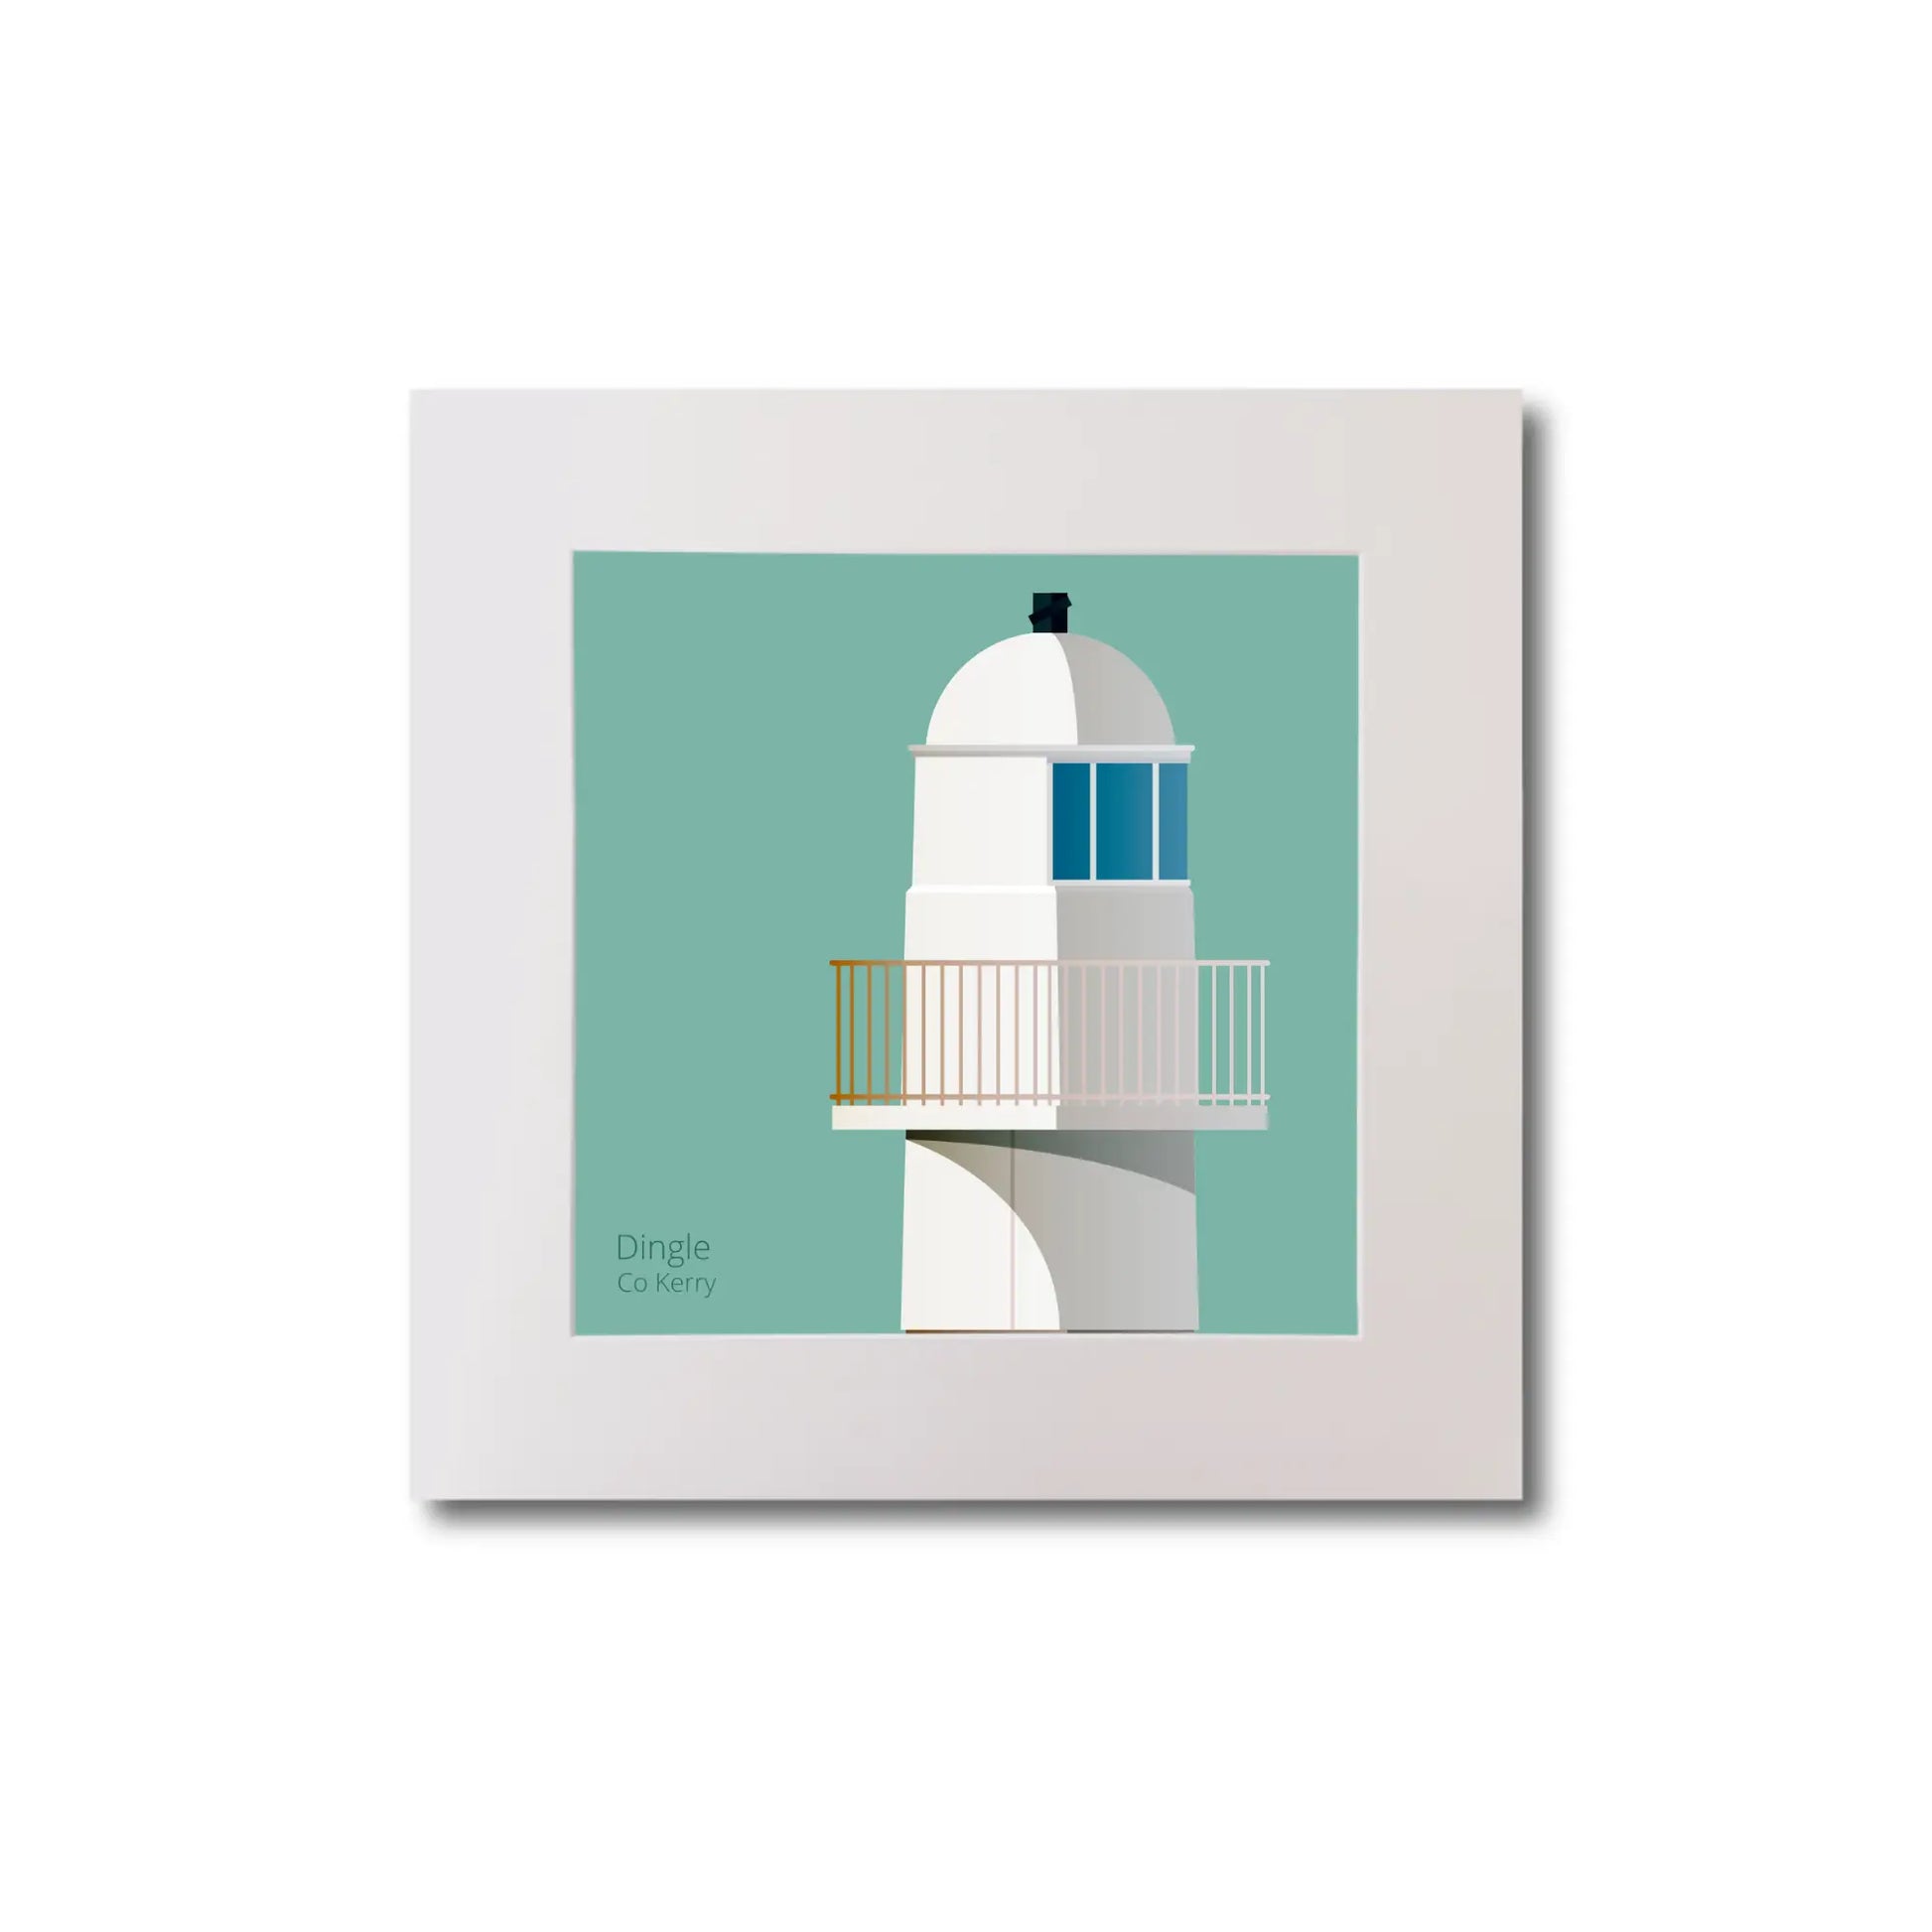 Illustration of Dingle lighthouse on an ocean green background, mounted and measuring 20x20cm.